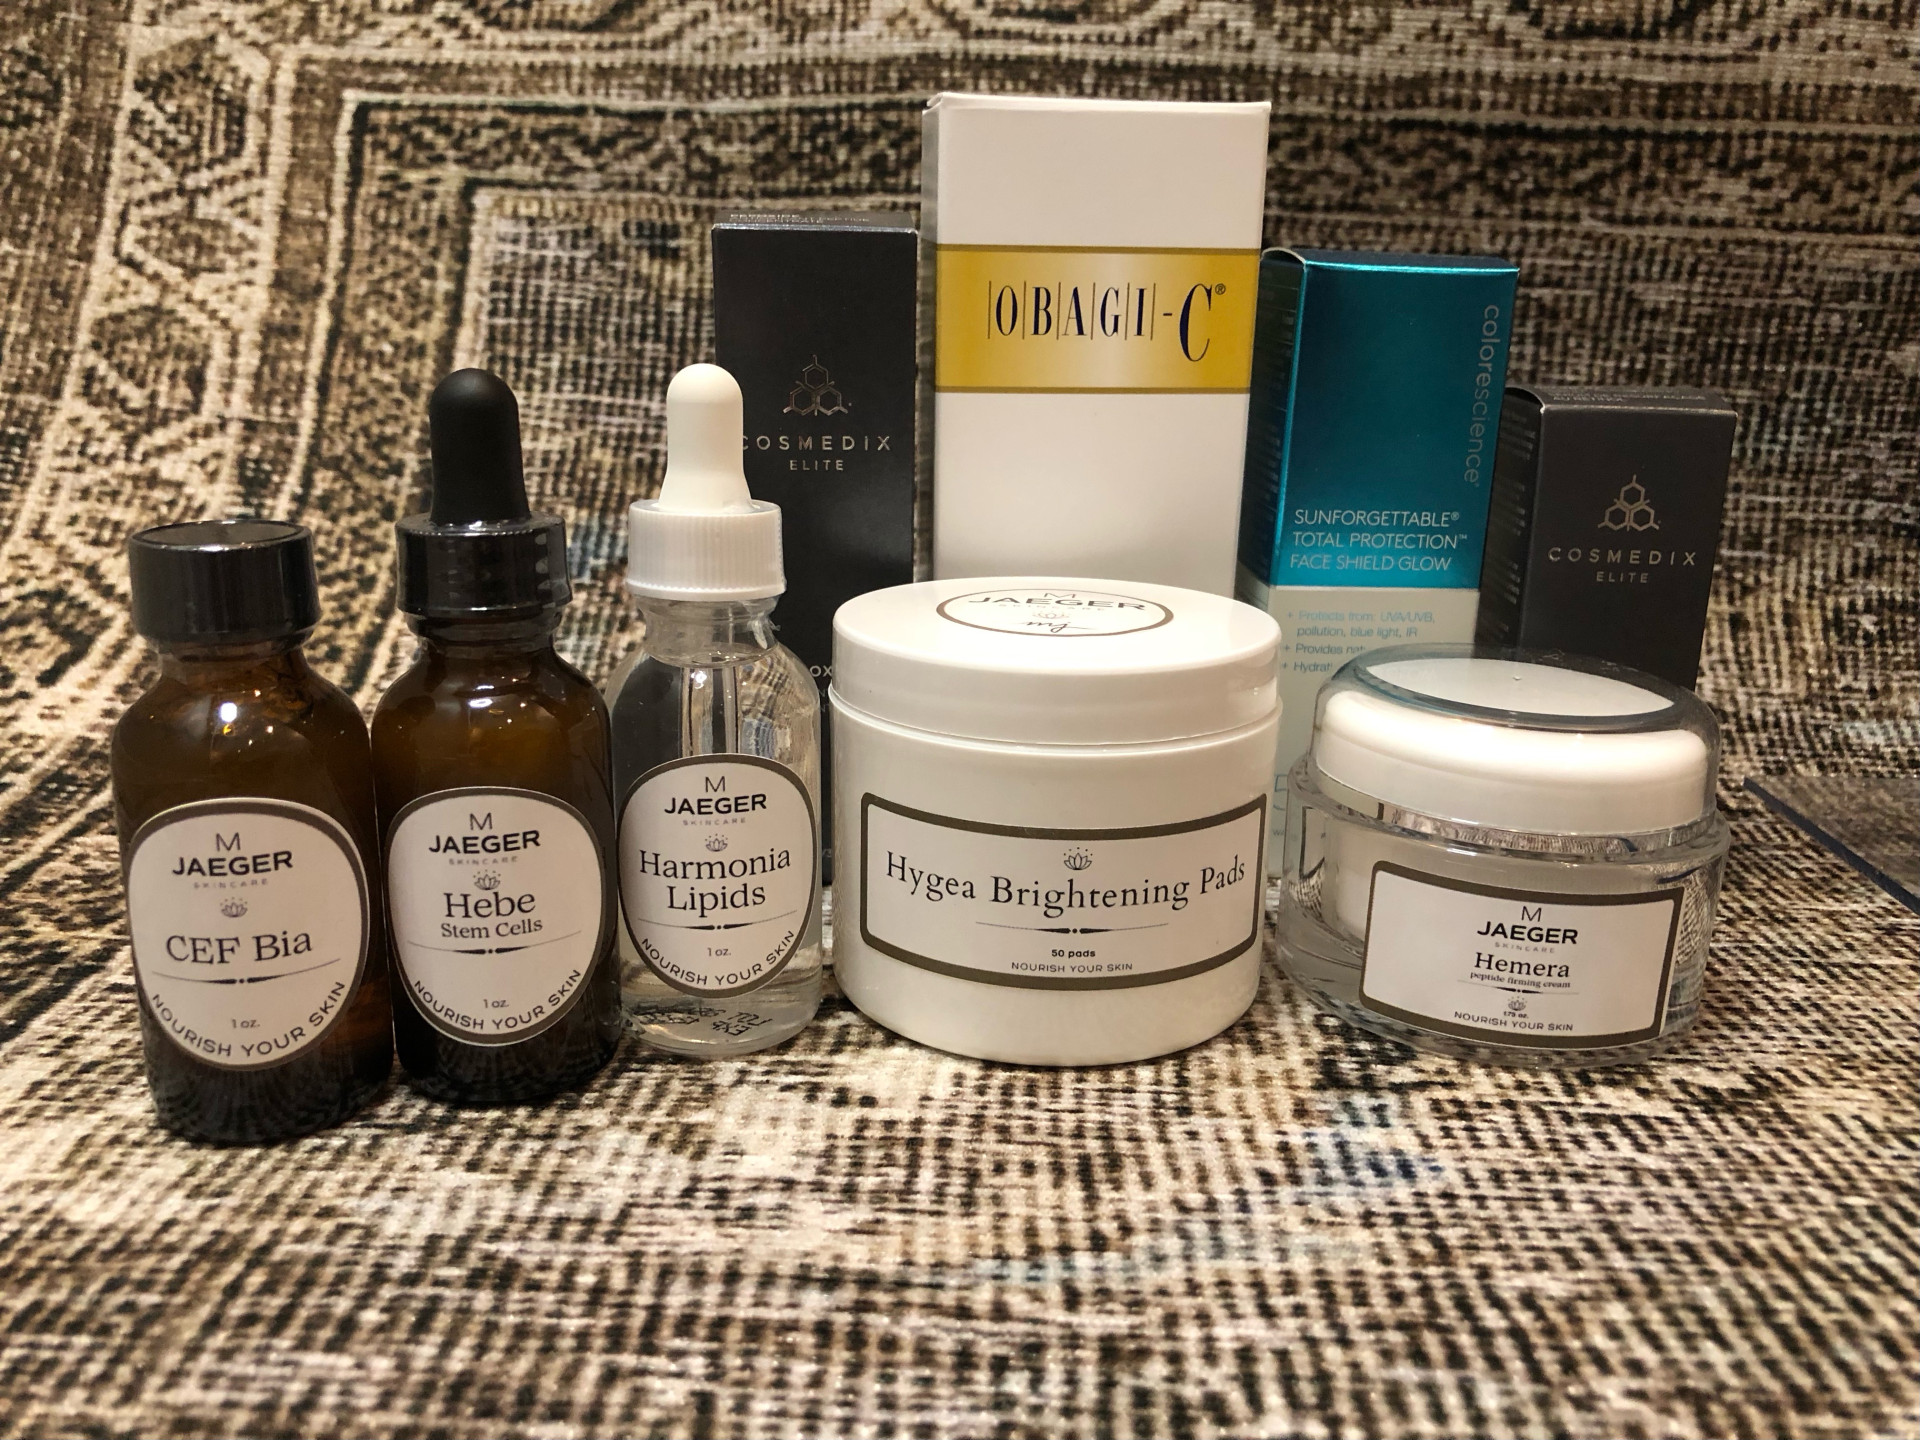 Marilyn Jaeger's product line